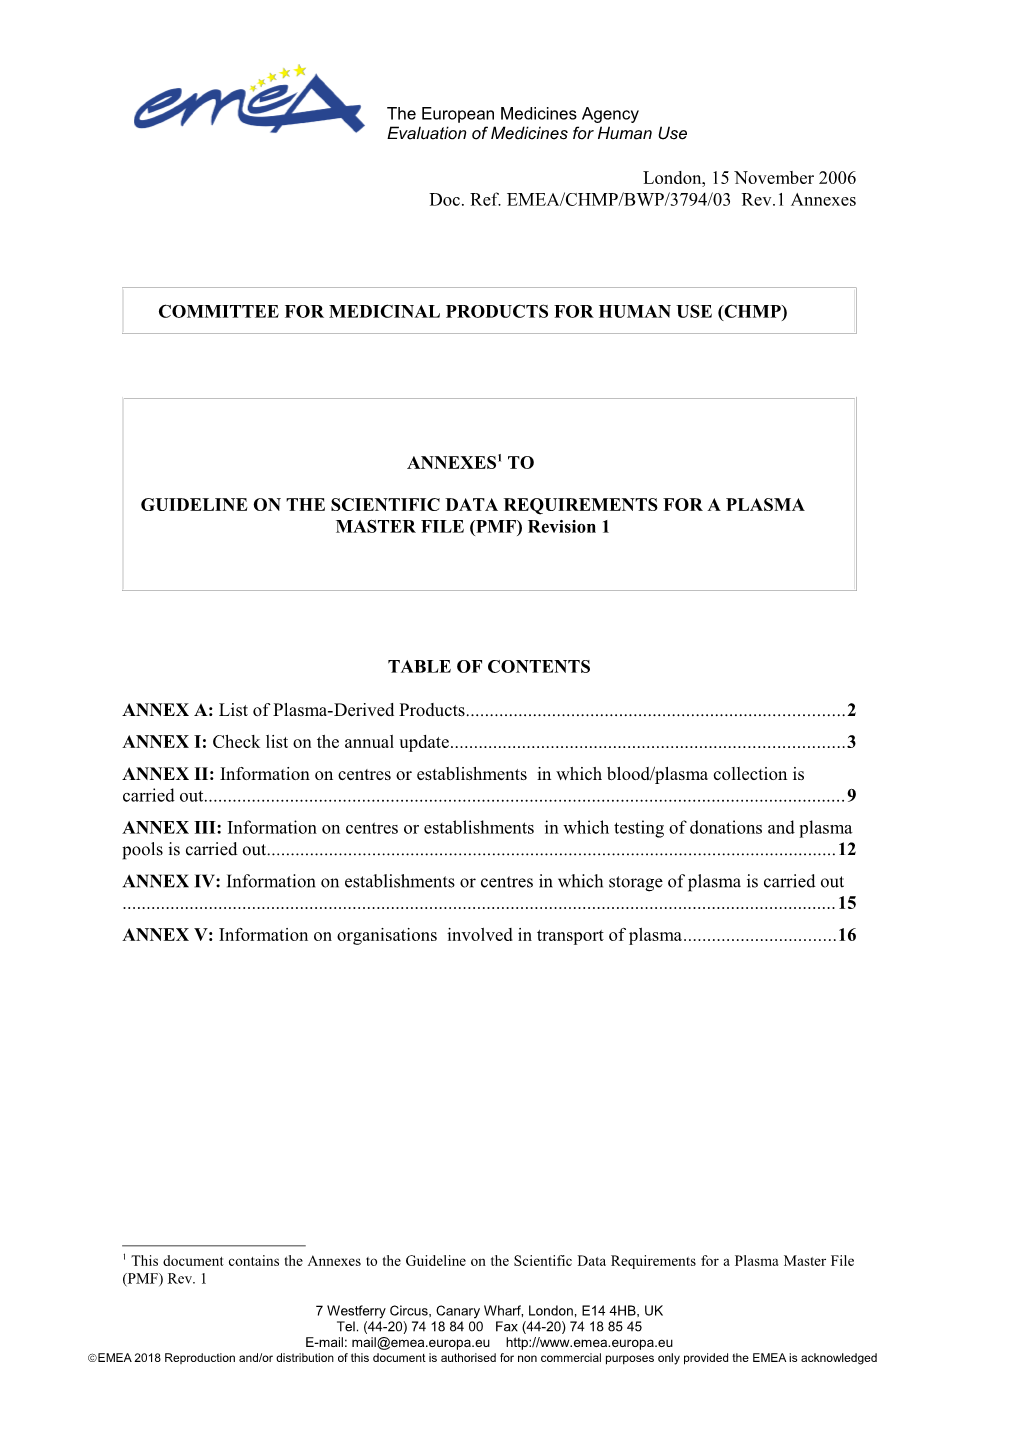 Committee for Medicinal Products for Human Use (Chmp)